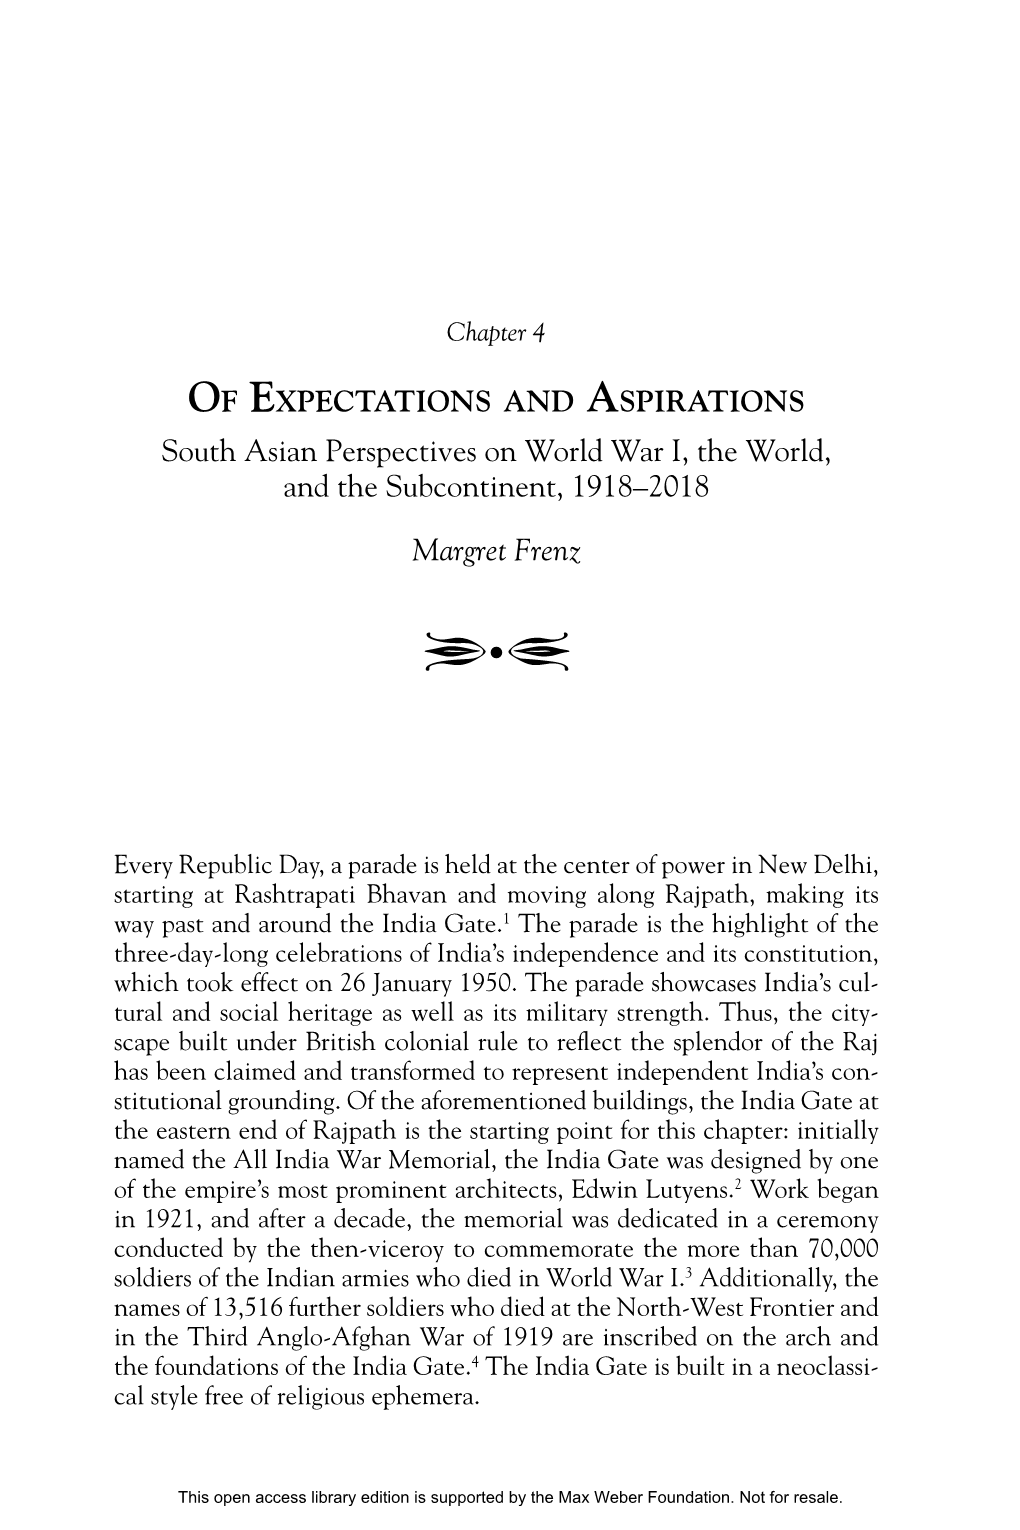 South Asian Perspectives on World War I, the World, and the Subcontinent, 1918–2018